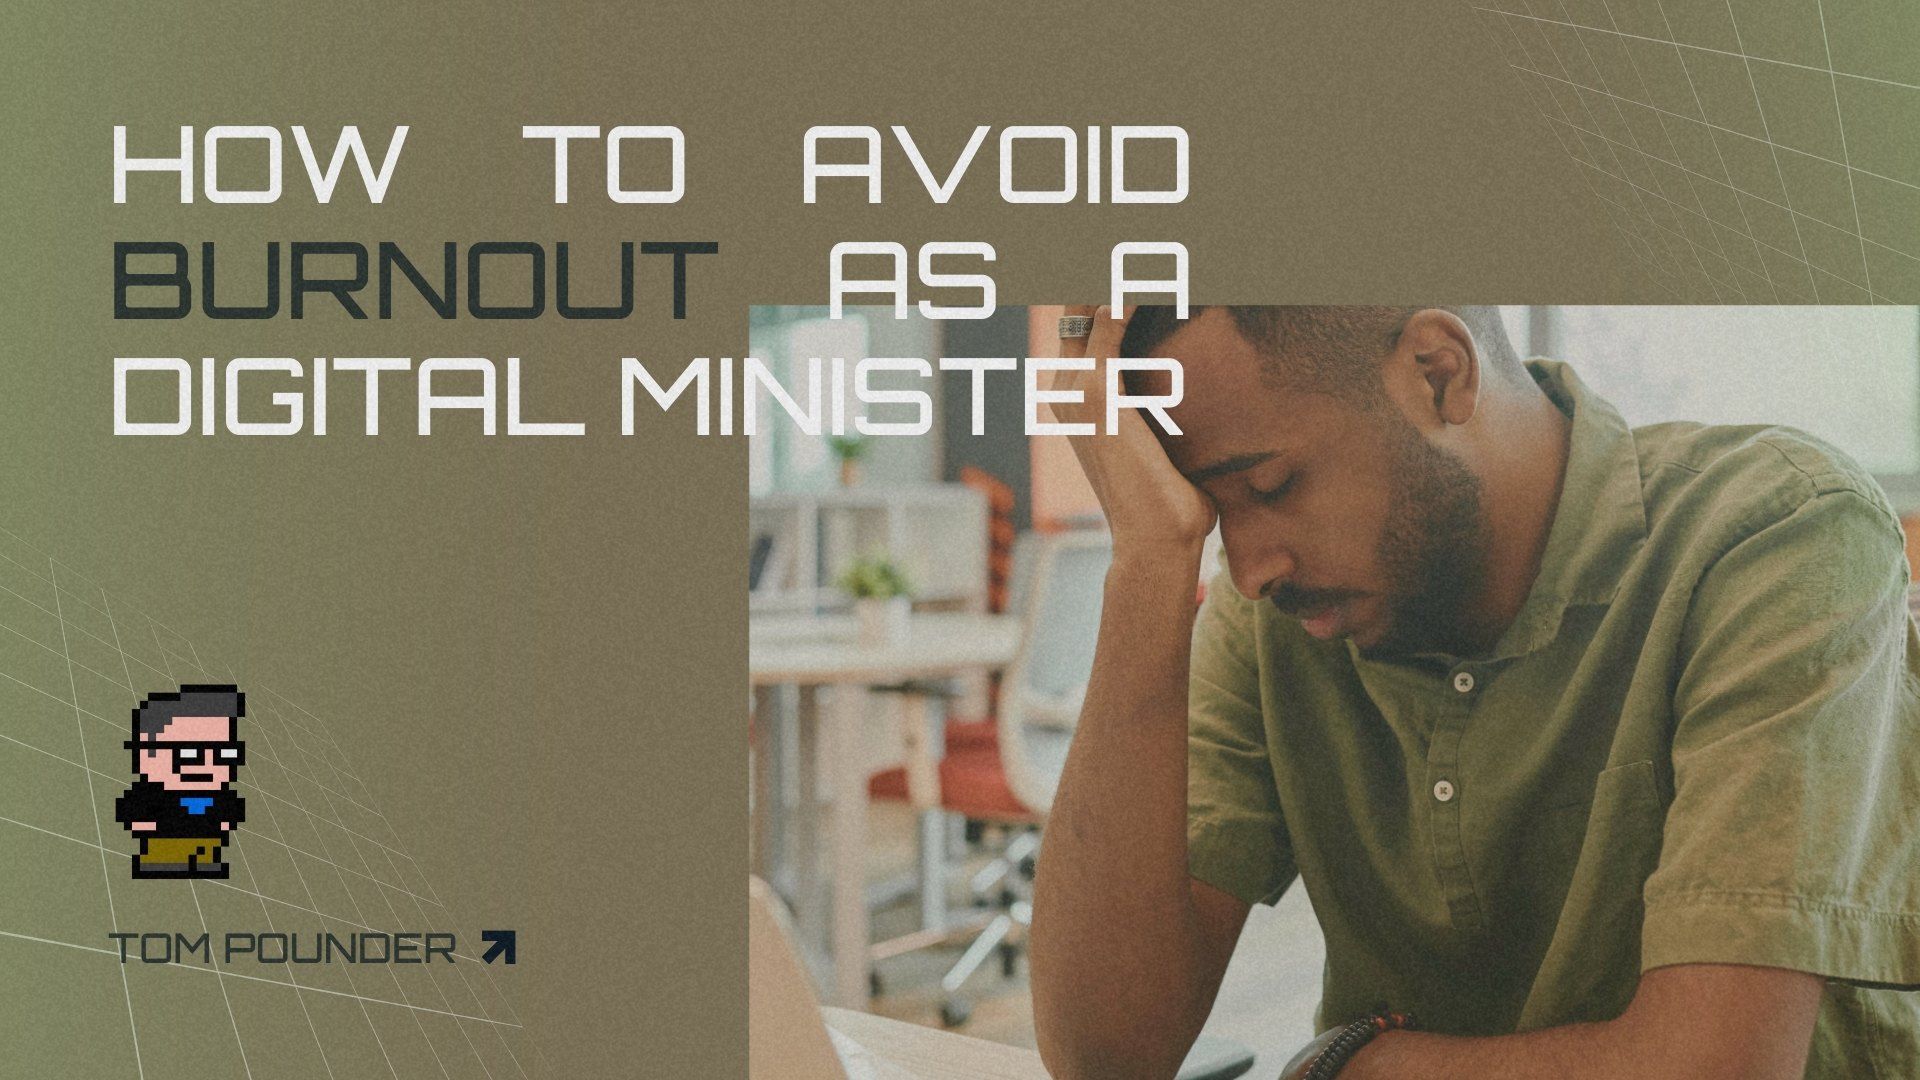 How to Avoid Burnout as Digital Minister